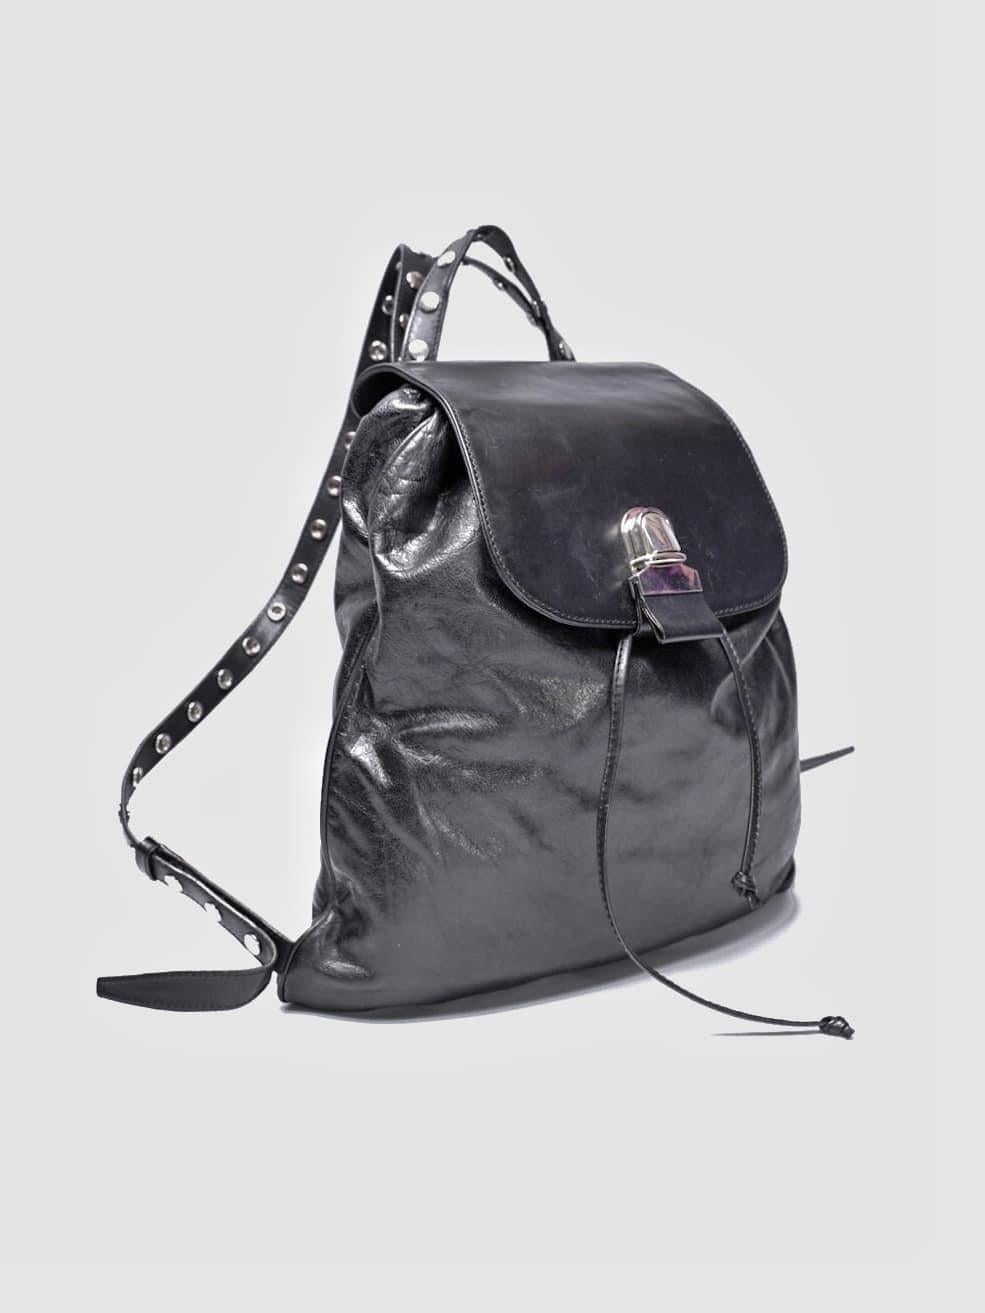 Maison Margiela Stud-Embellished Black Leather Backpack

Discover Timeless Elegance with Maison Margiela's Stud-Embellished Black Leather Backpack. This Cracked Leather Marvel Features Tonal Trim, Signature Stitched Detailing, and Adjustable Straps